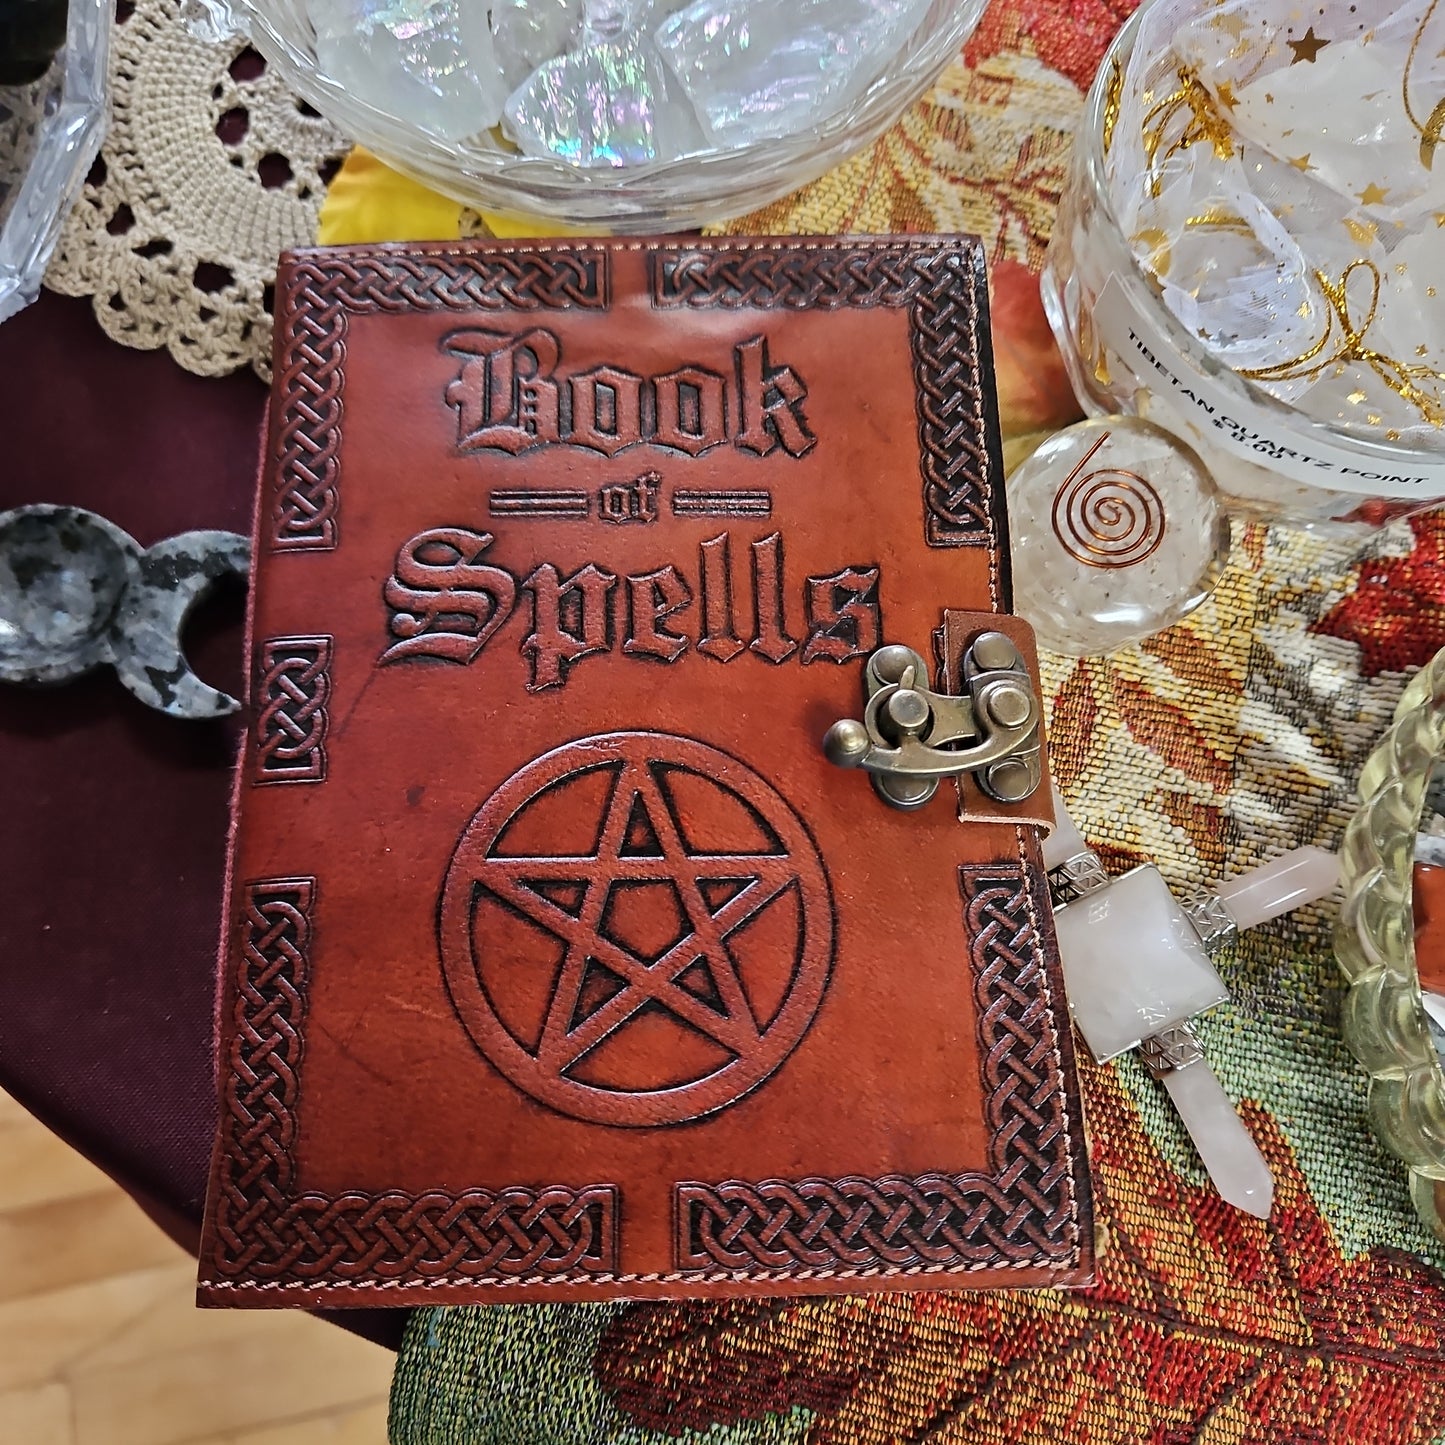 Book of Spells Leather Journal with Latch 5 x 7 "